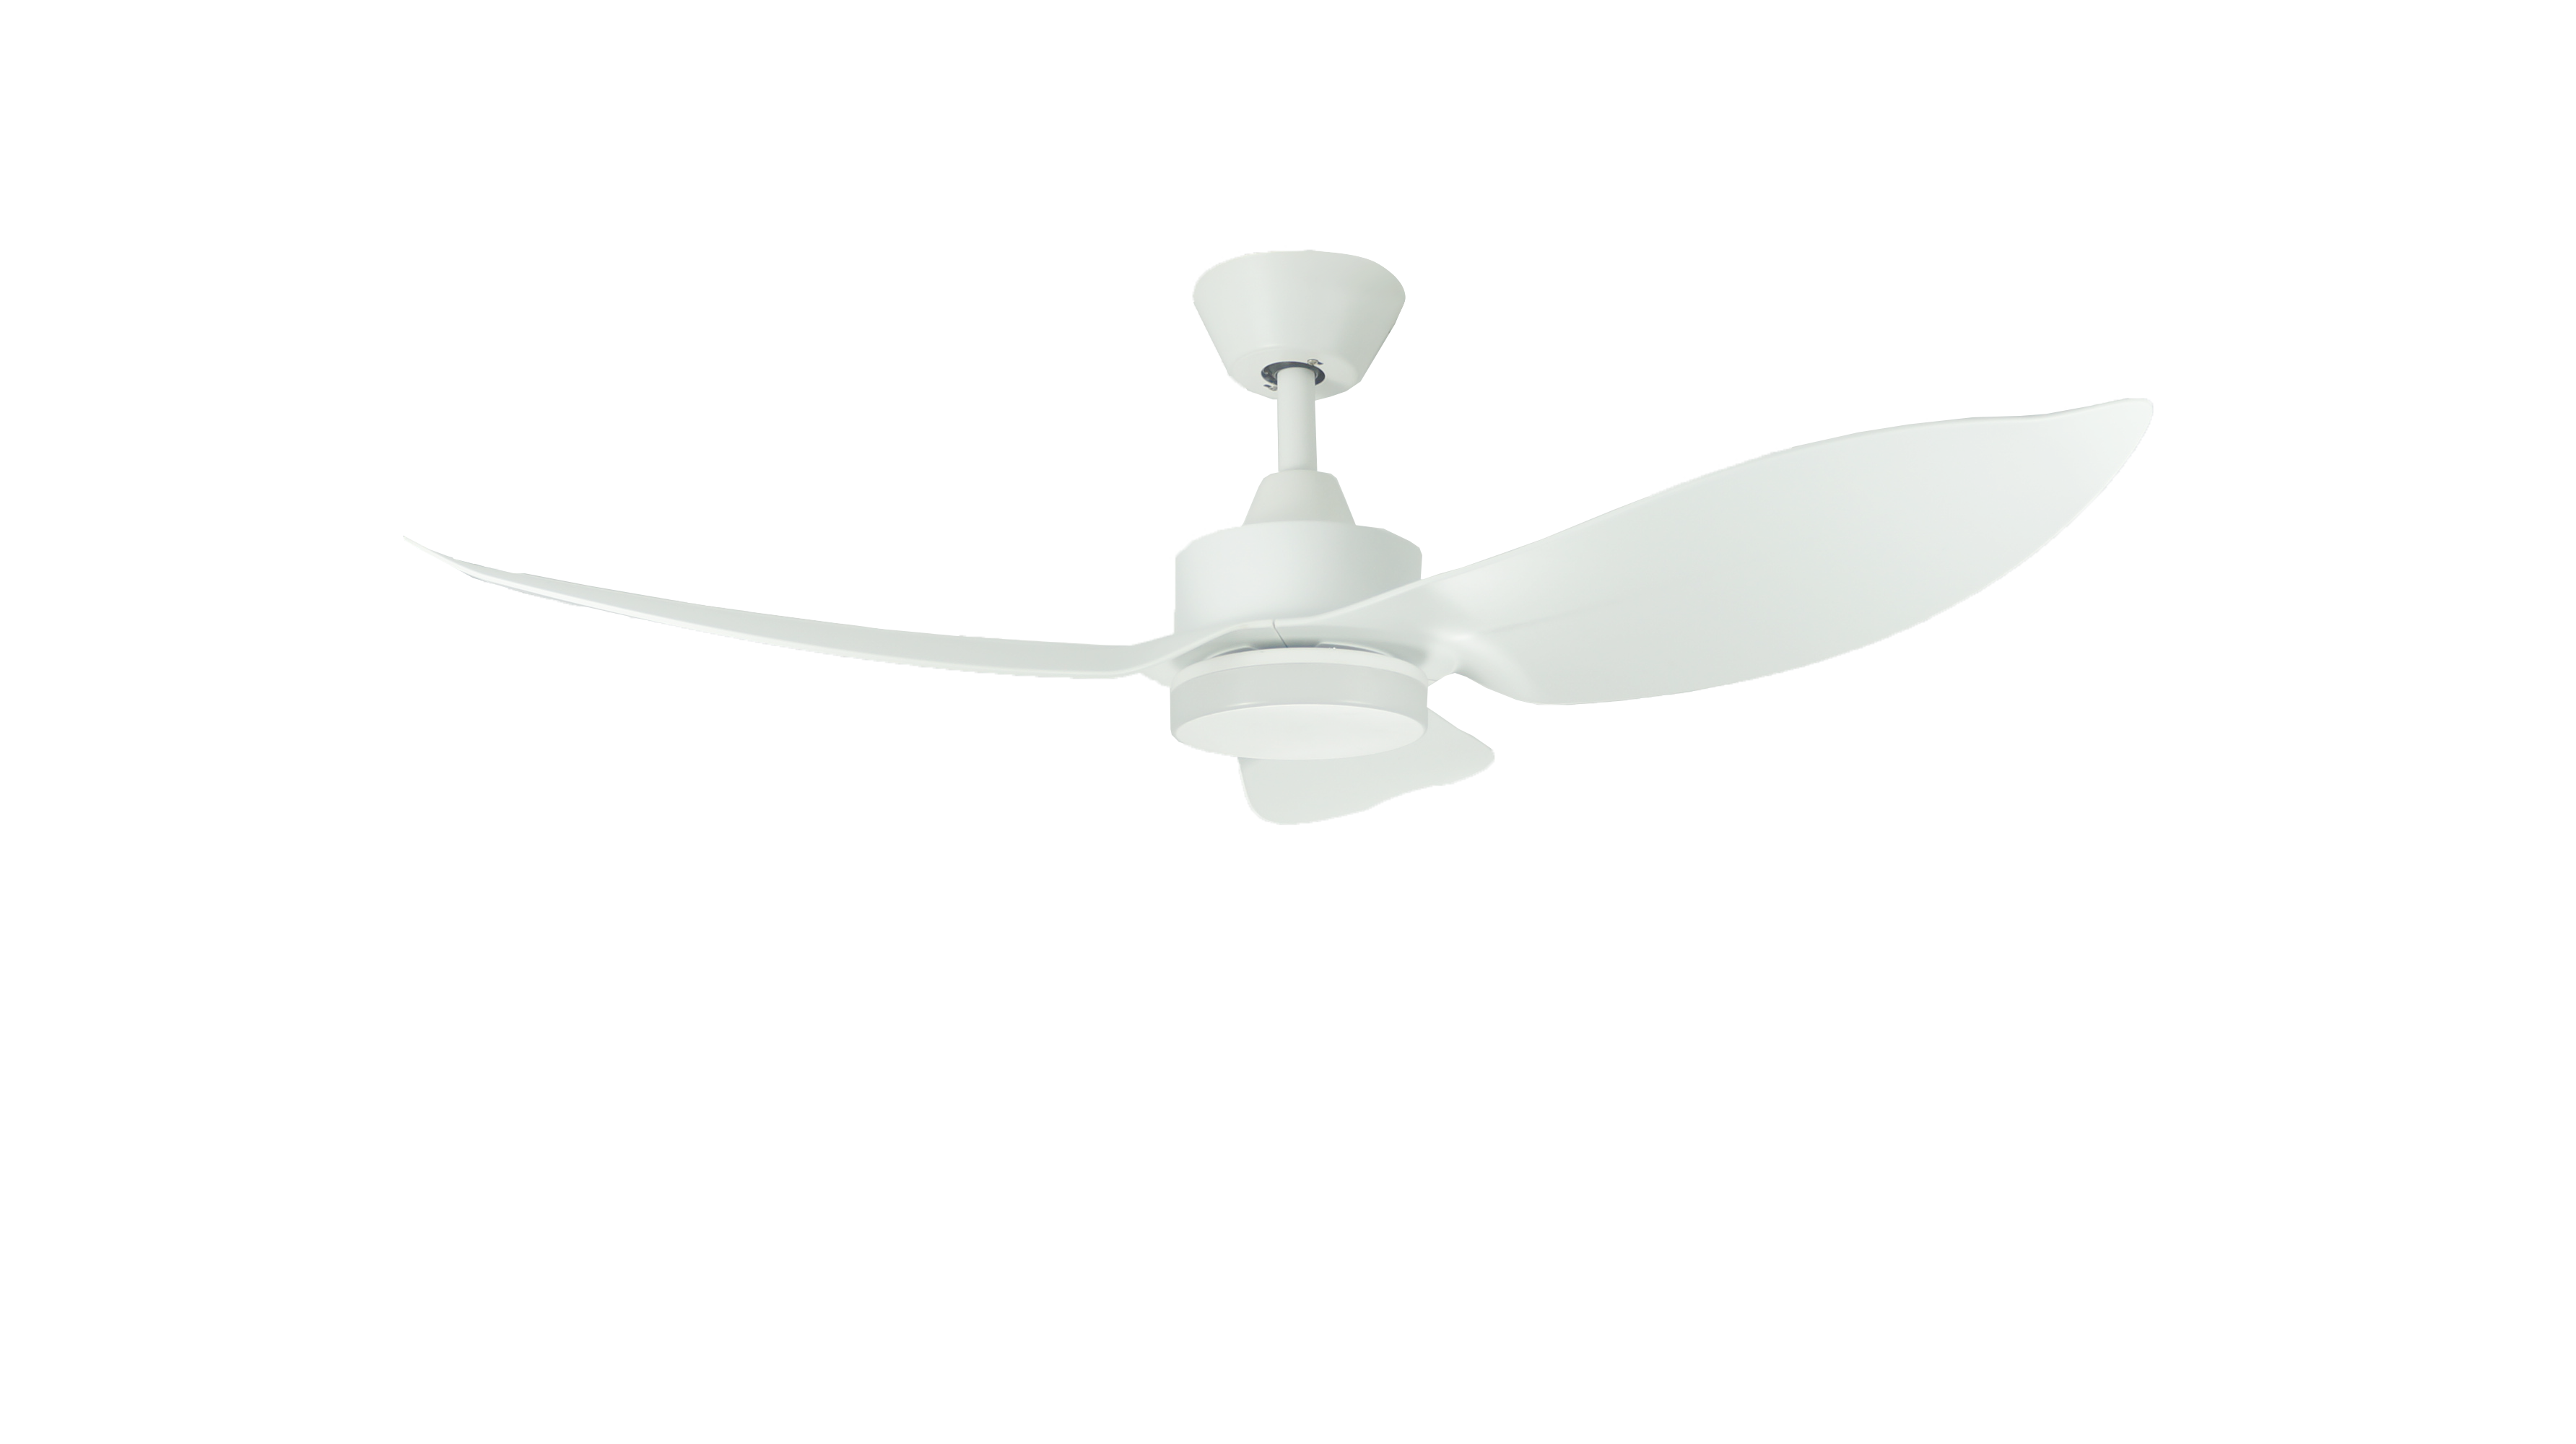 Airbena New Design DC Motor Indoor 52inch Ceiling Fan with LED Light Color Optional 